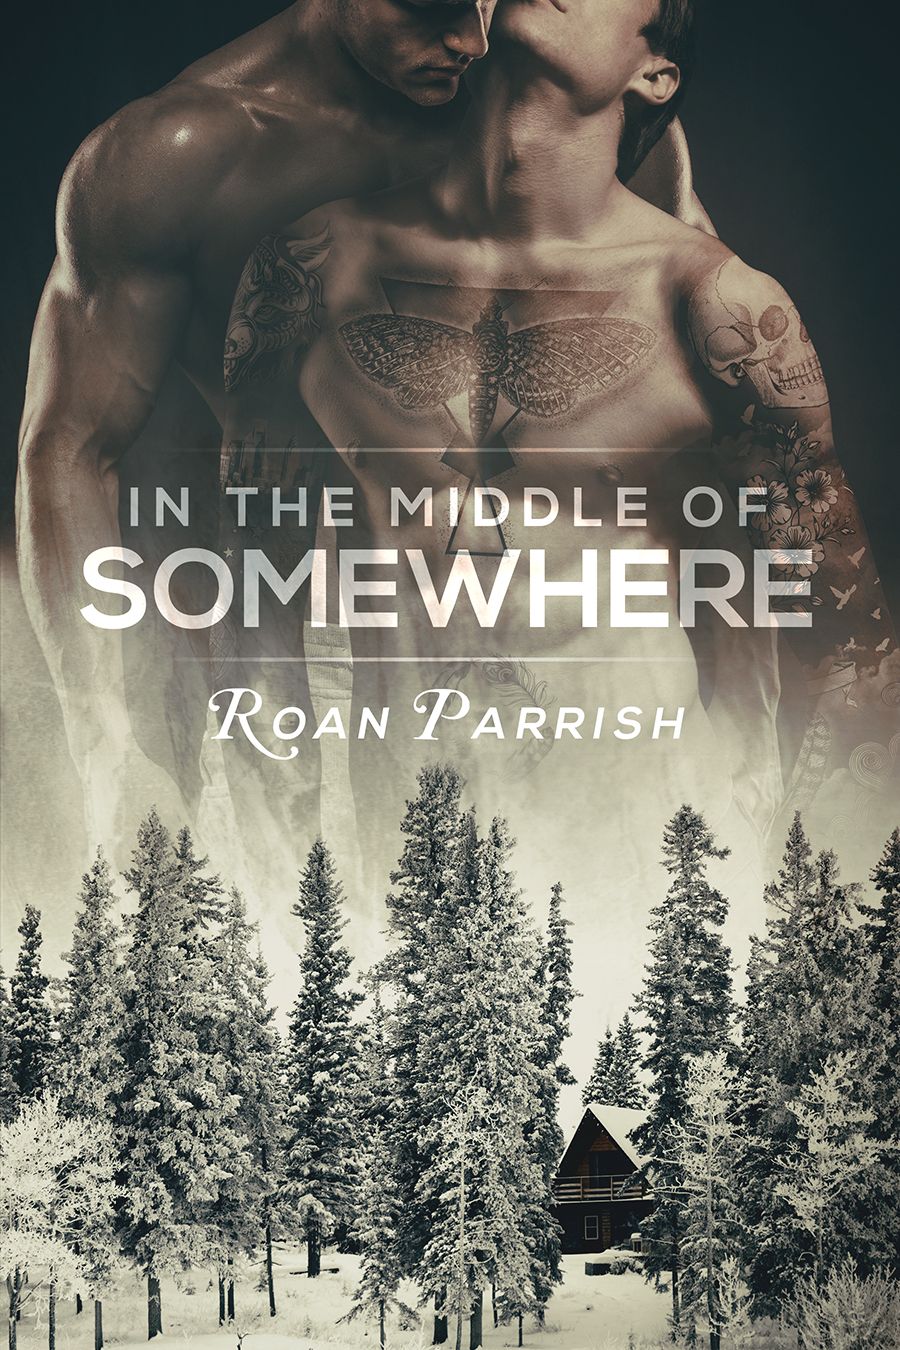 Roan Parrish author of gay romance